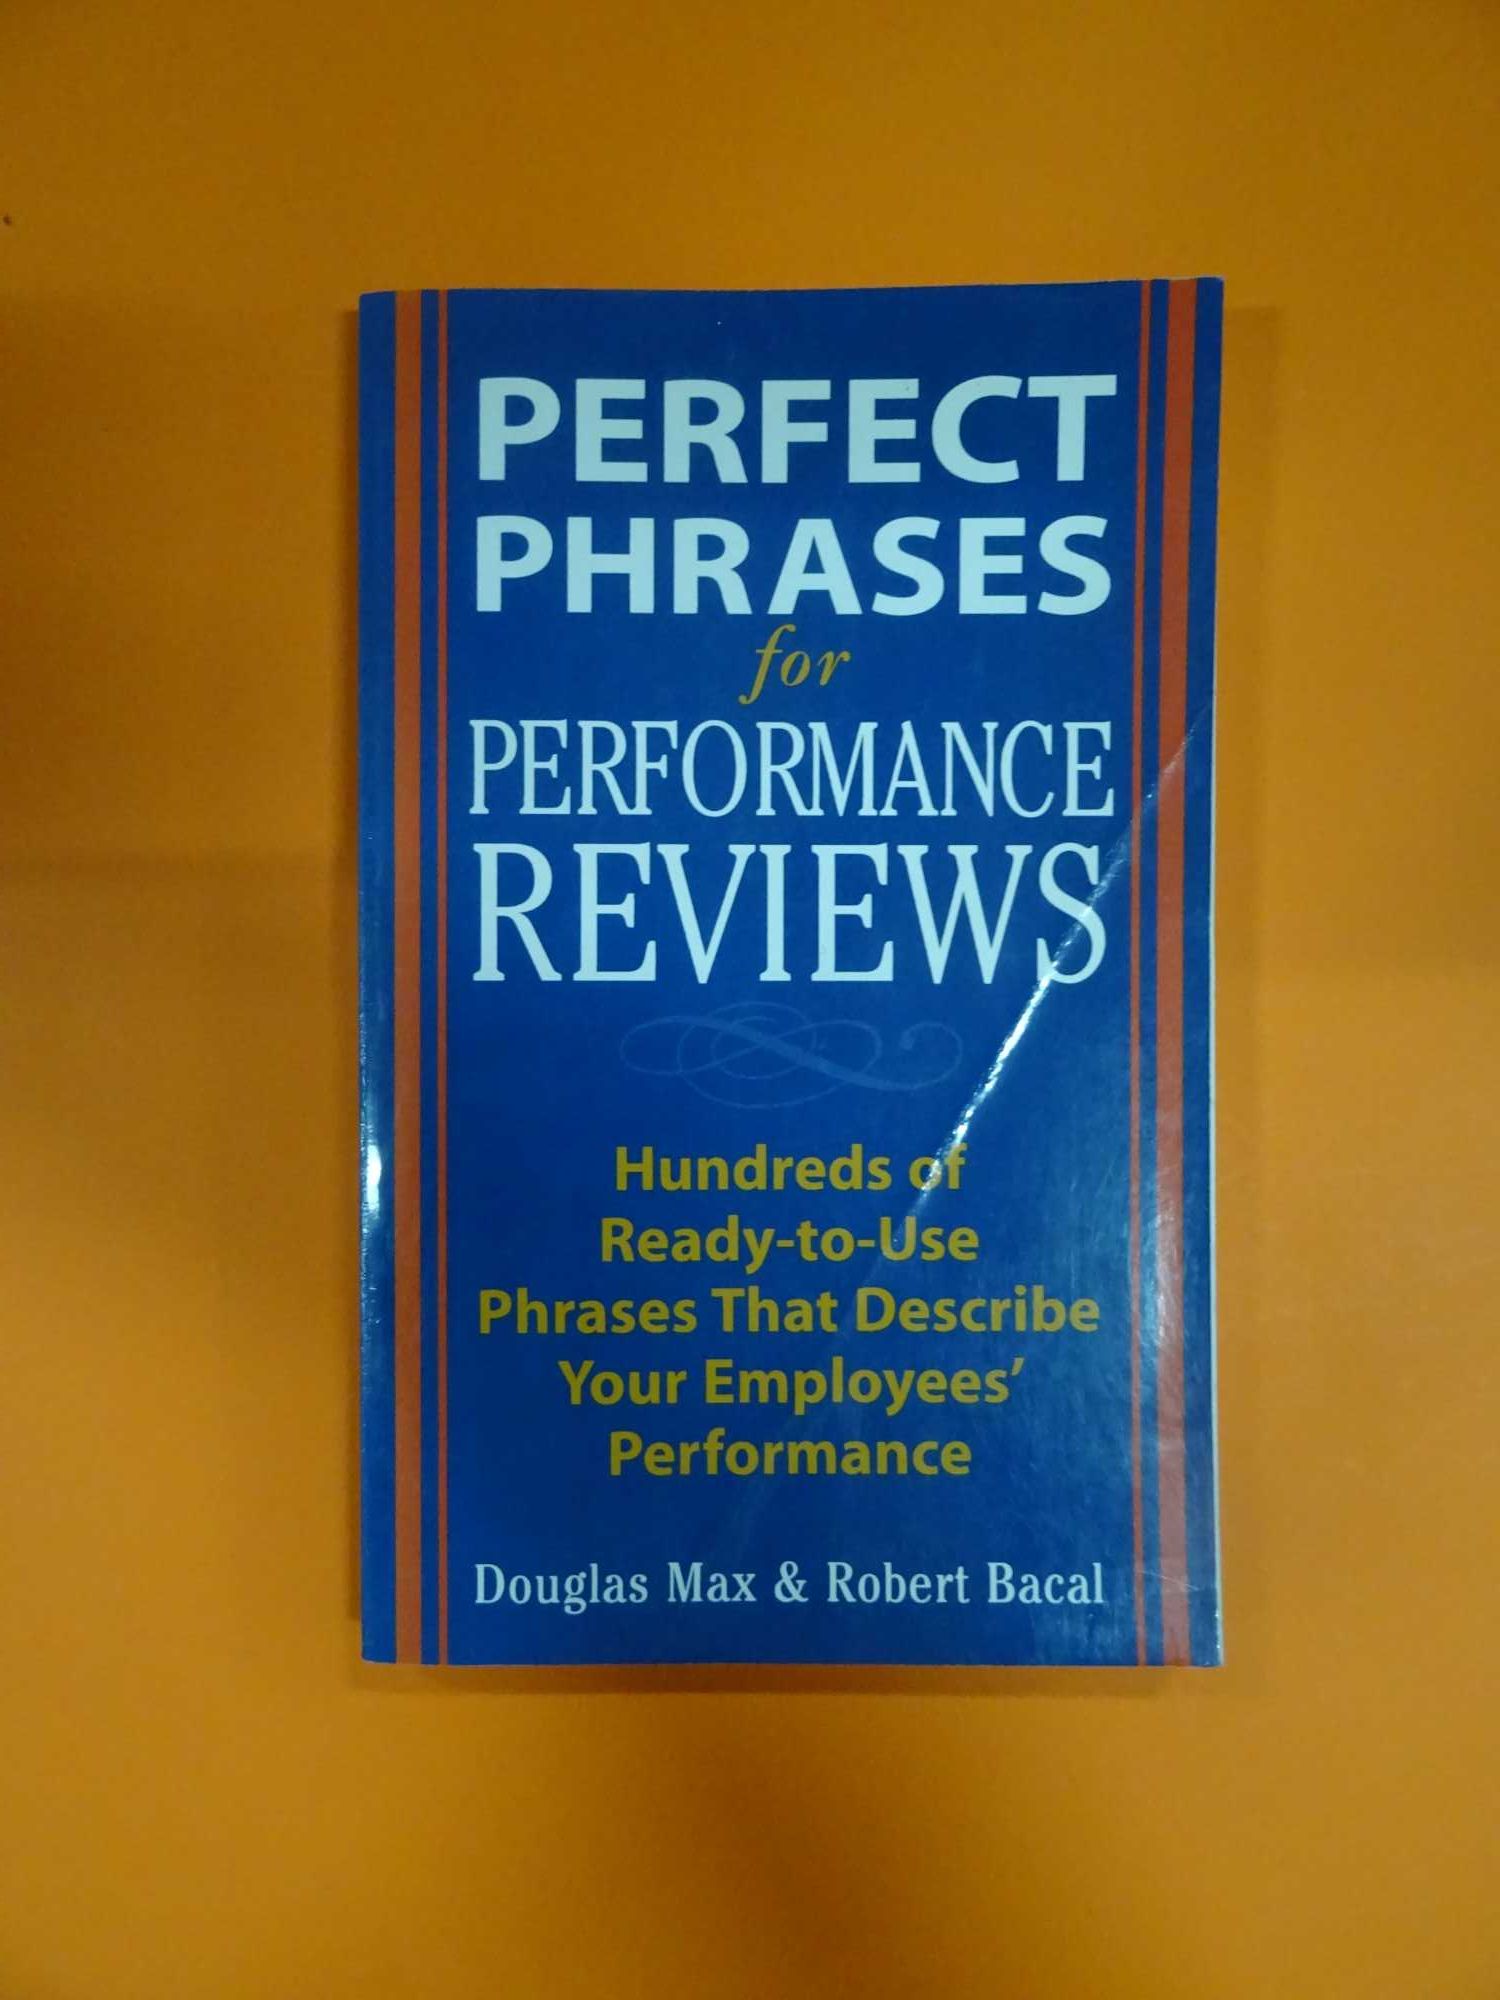 Perfect phrases for performance reviews - Douglas Max & Robert Bacal